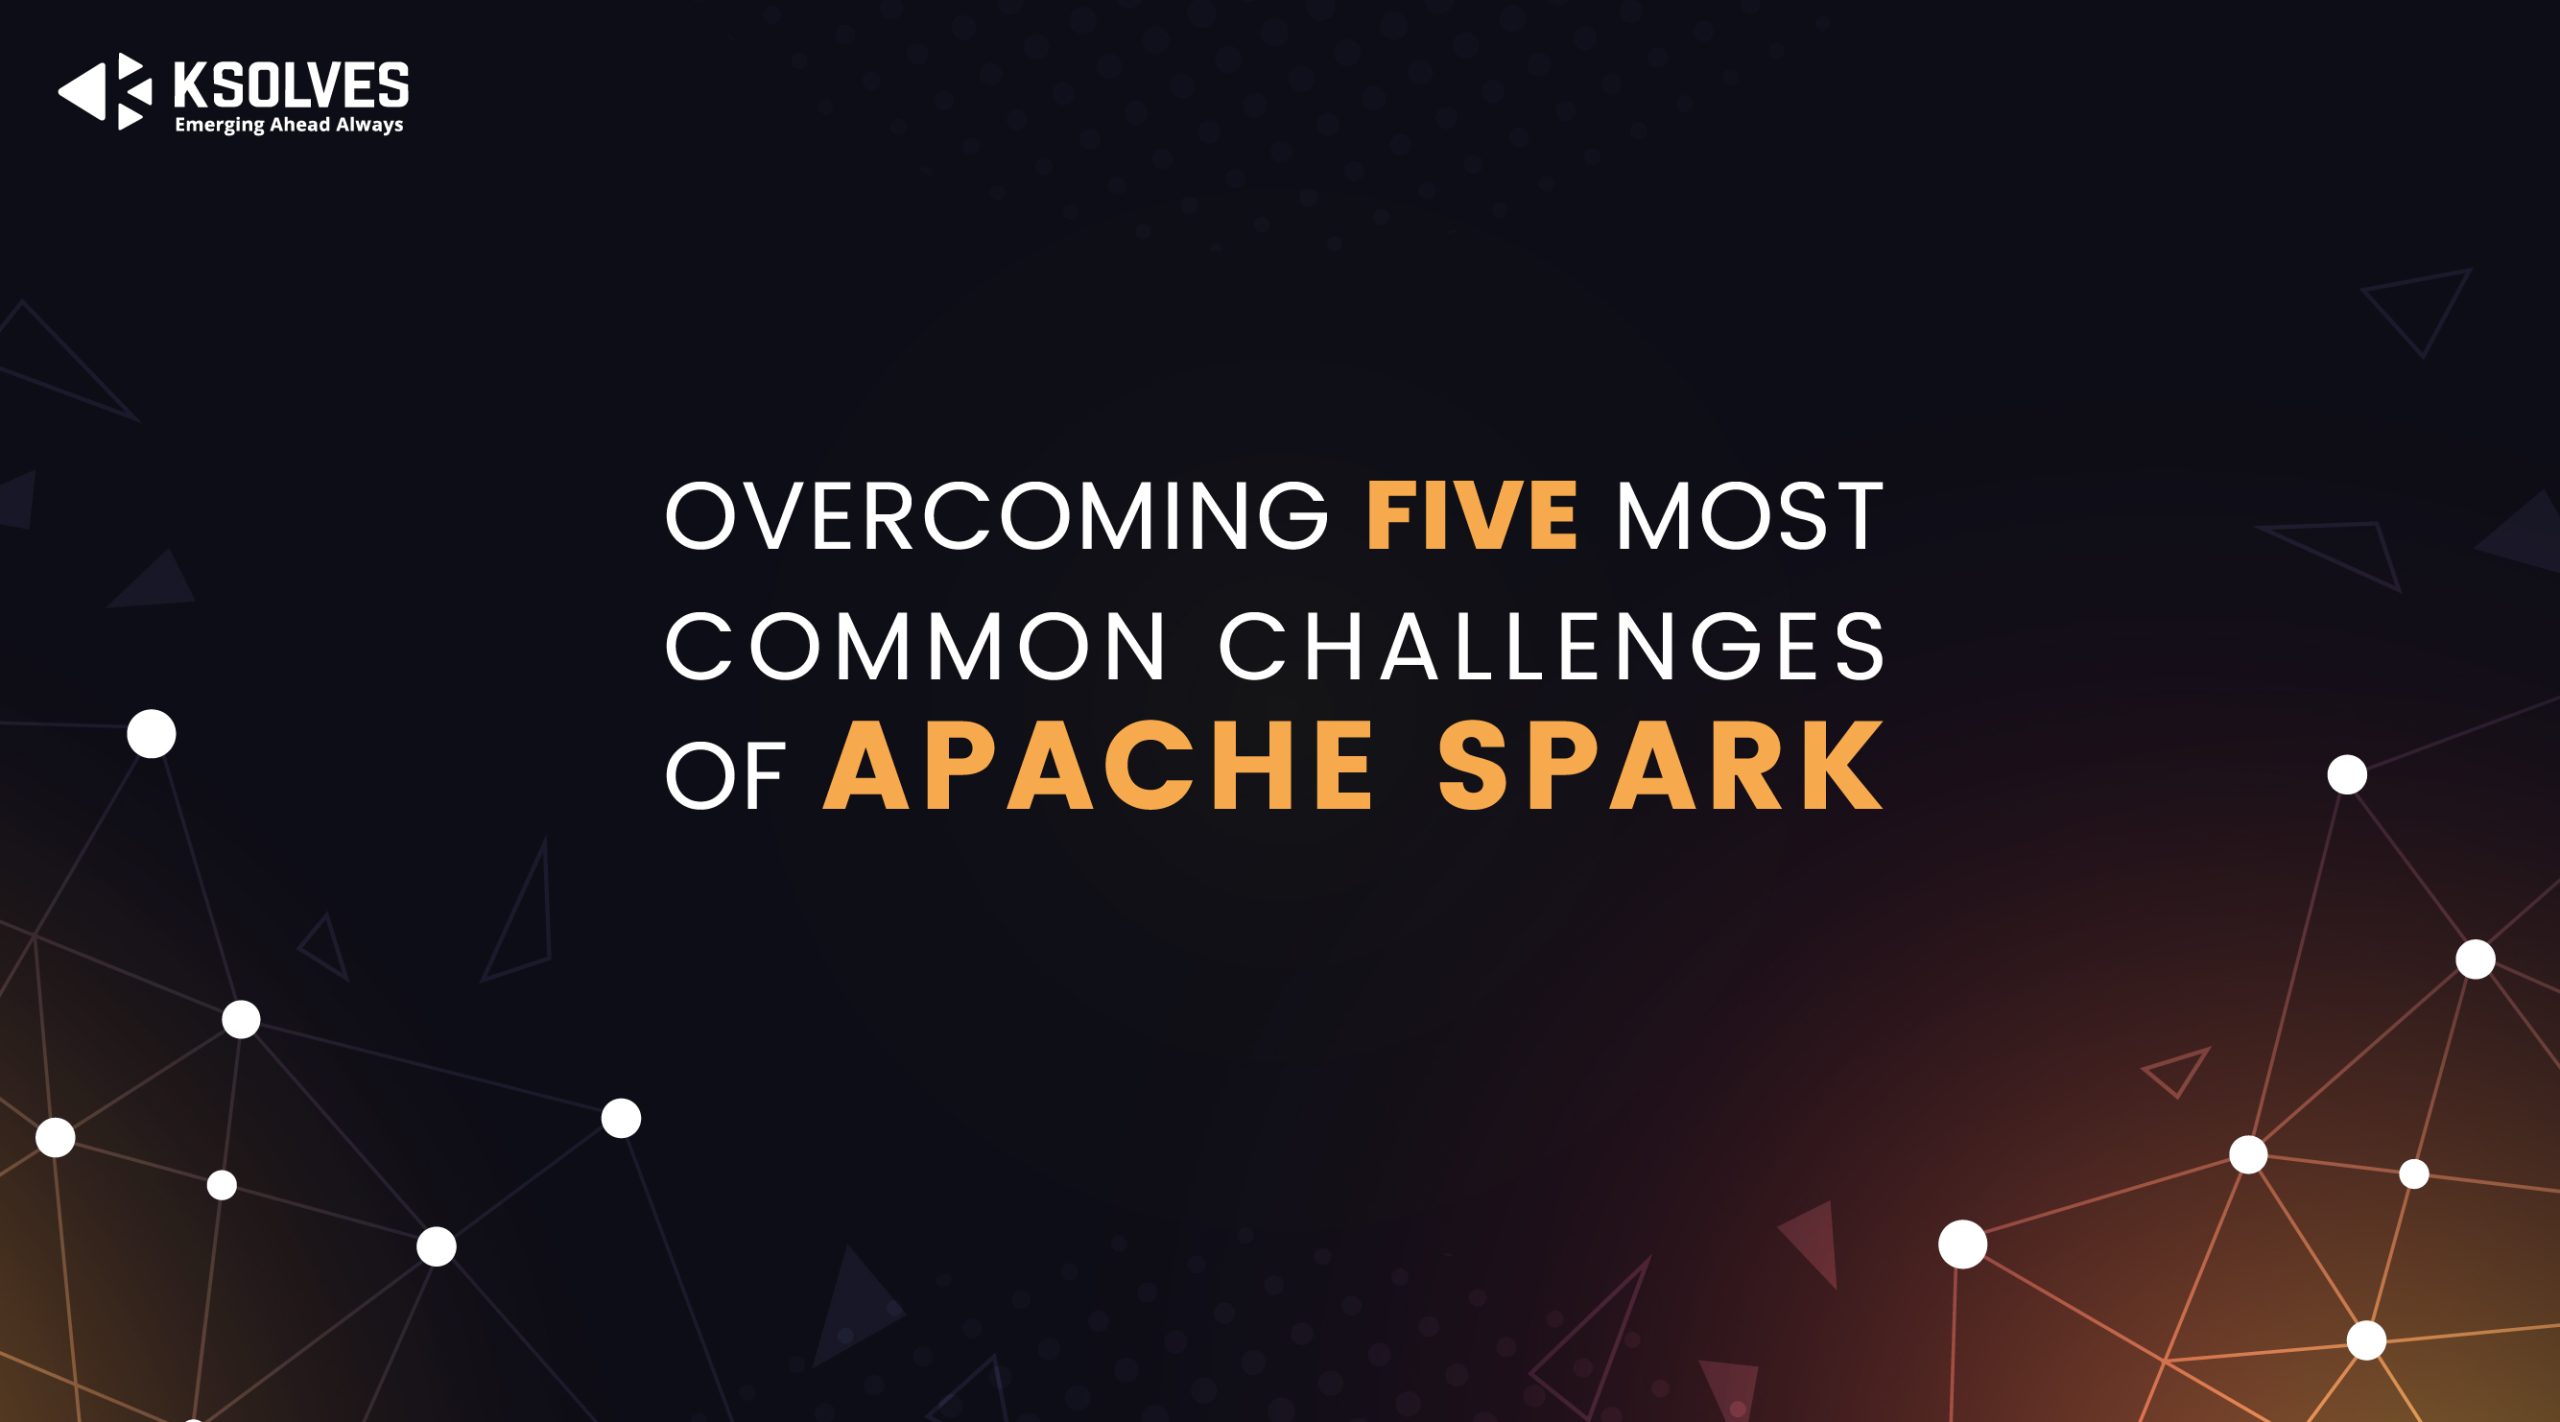 Apache Spark consulting